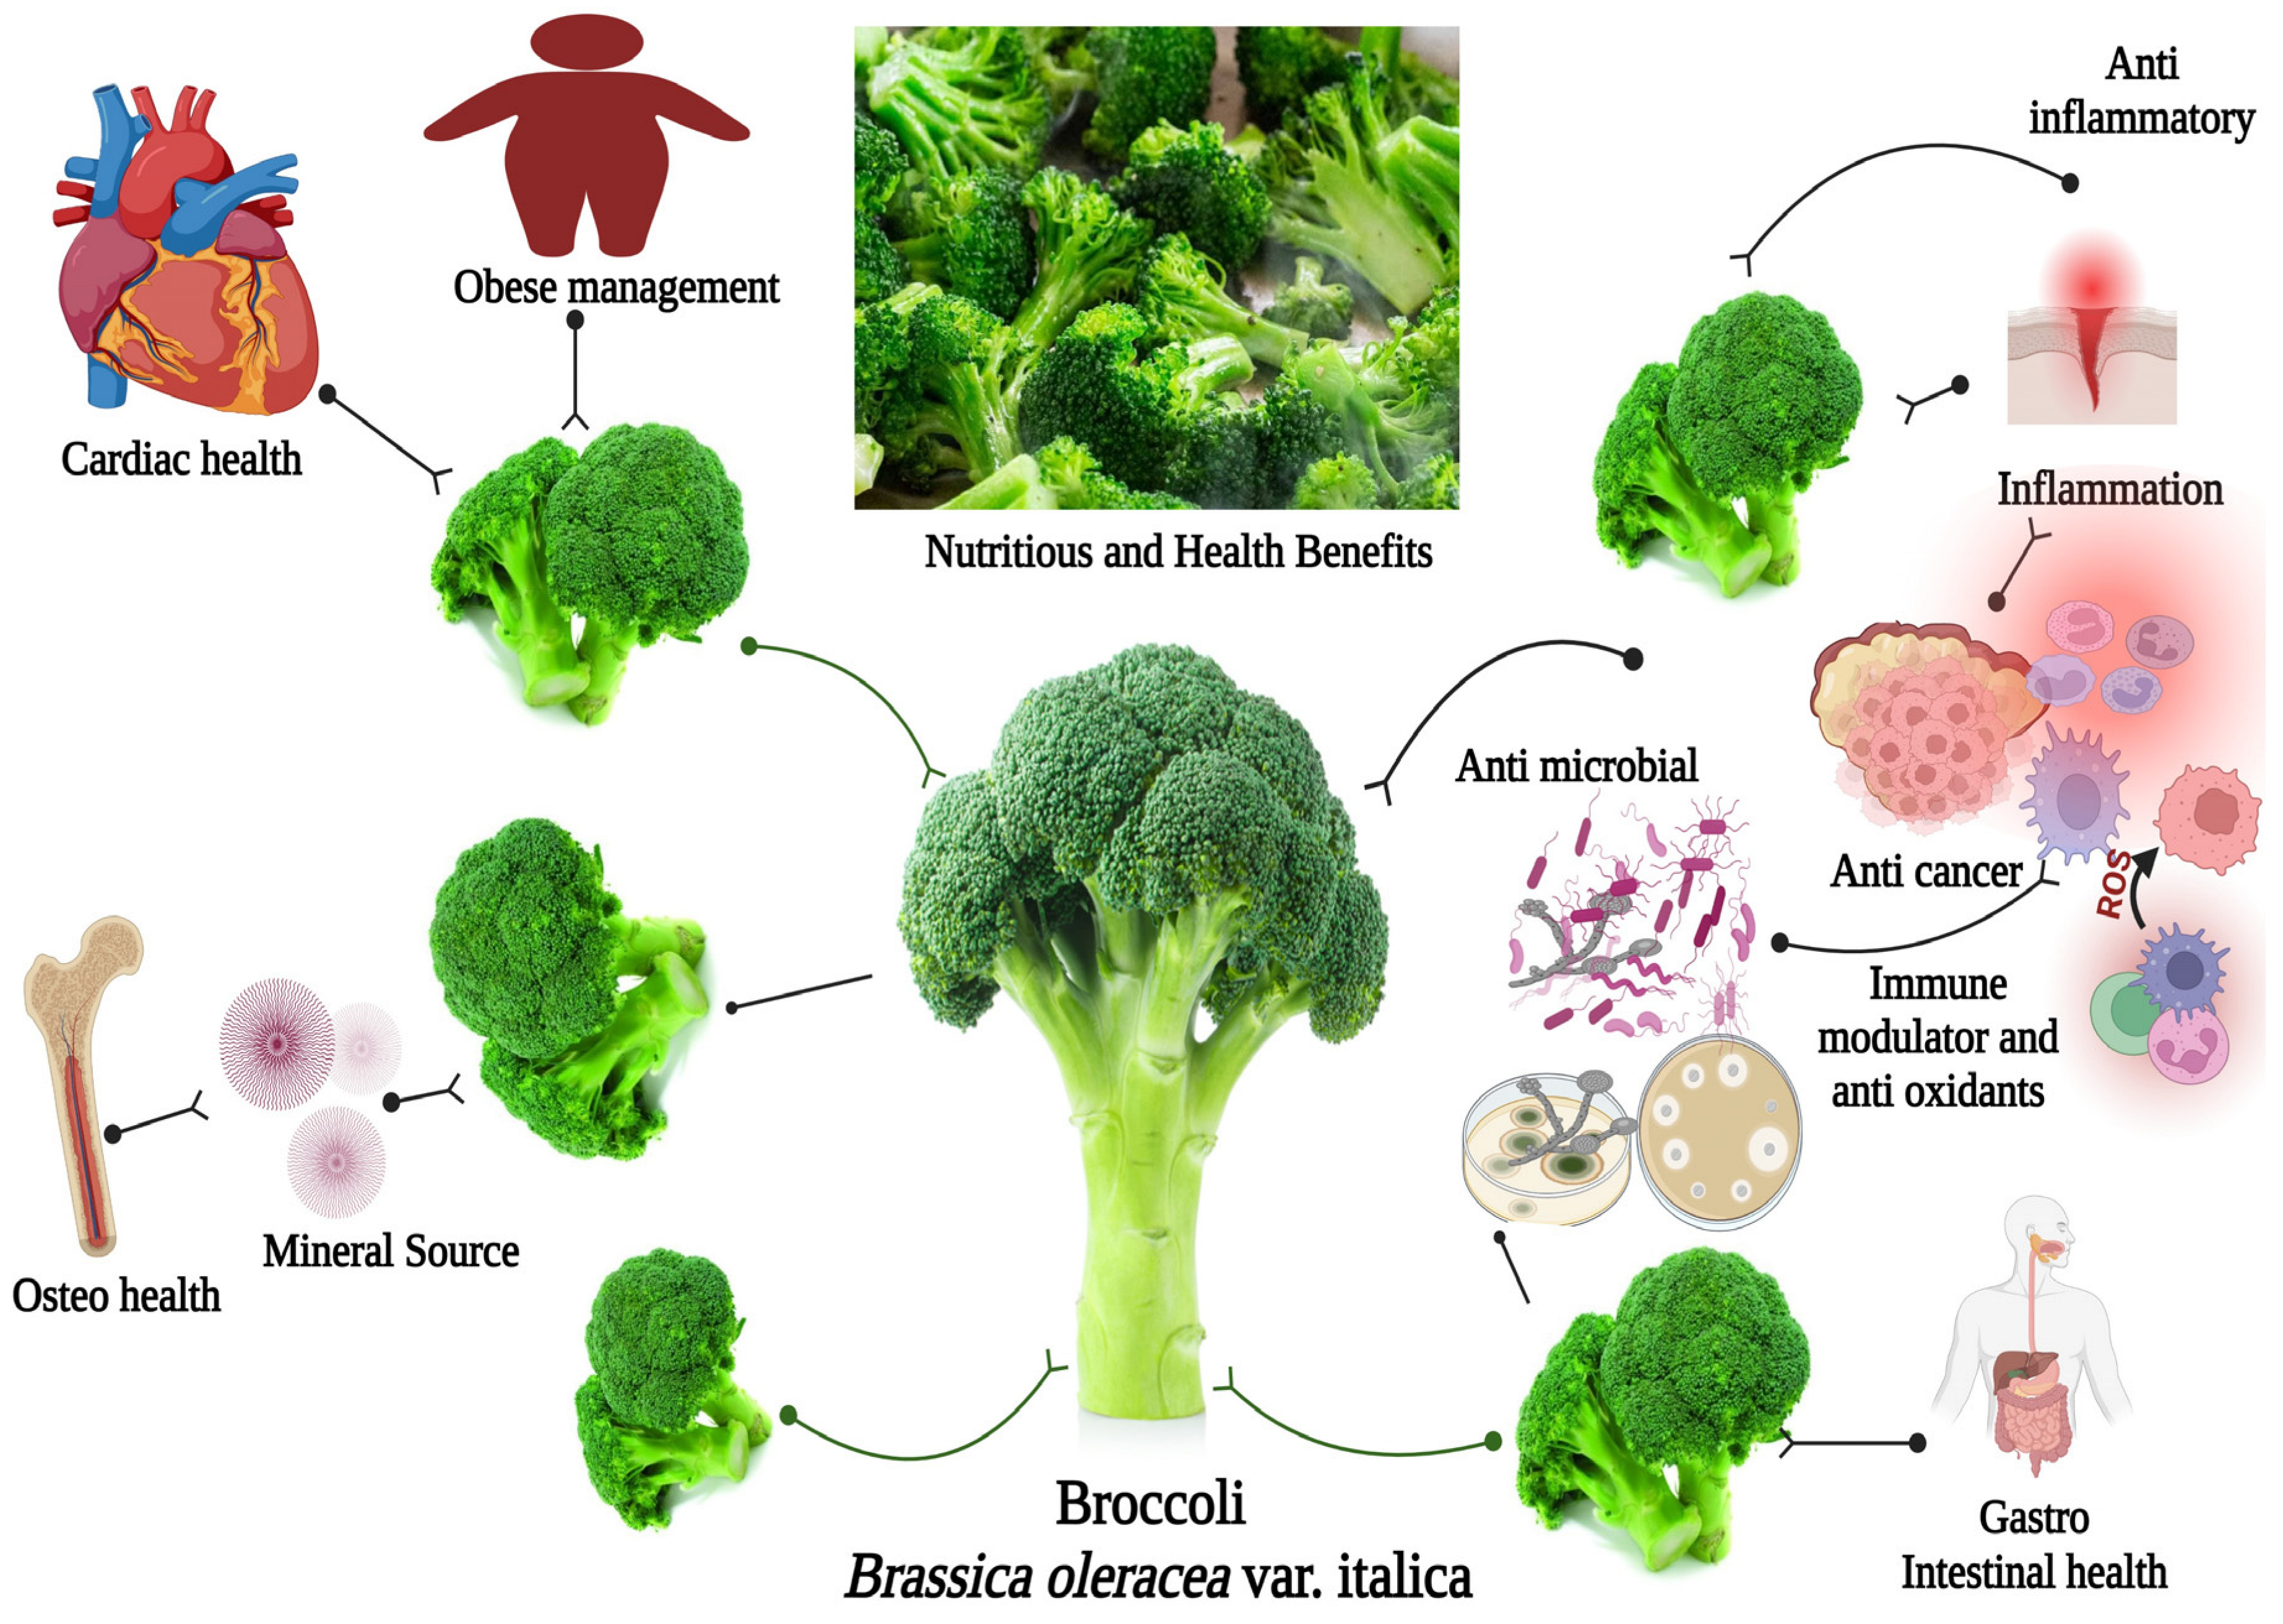 Antibiotics | Free A Broccoli: and Vegetable | Nutritional Properties In-Depth Antimicrobial An Multi-Faceted Abilities, Review of for Full-Text Anti-inflammatory Health: Its Attributes